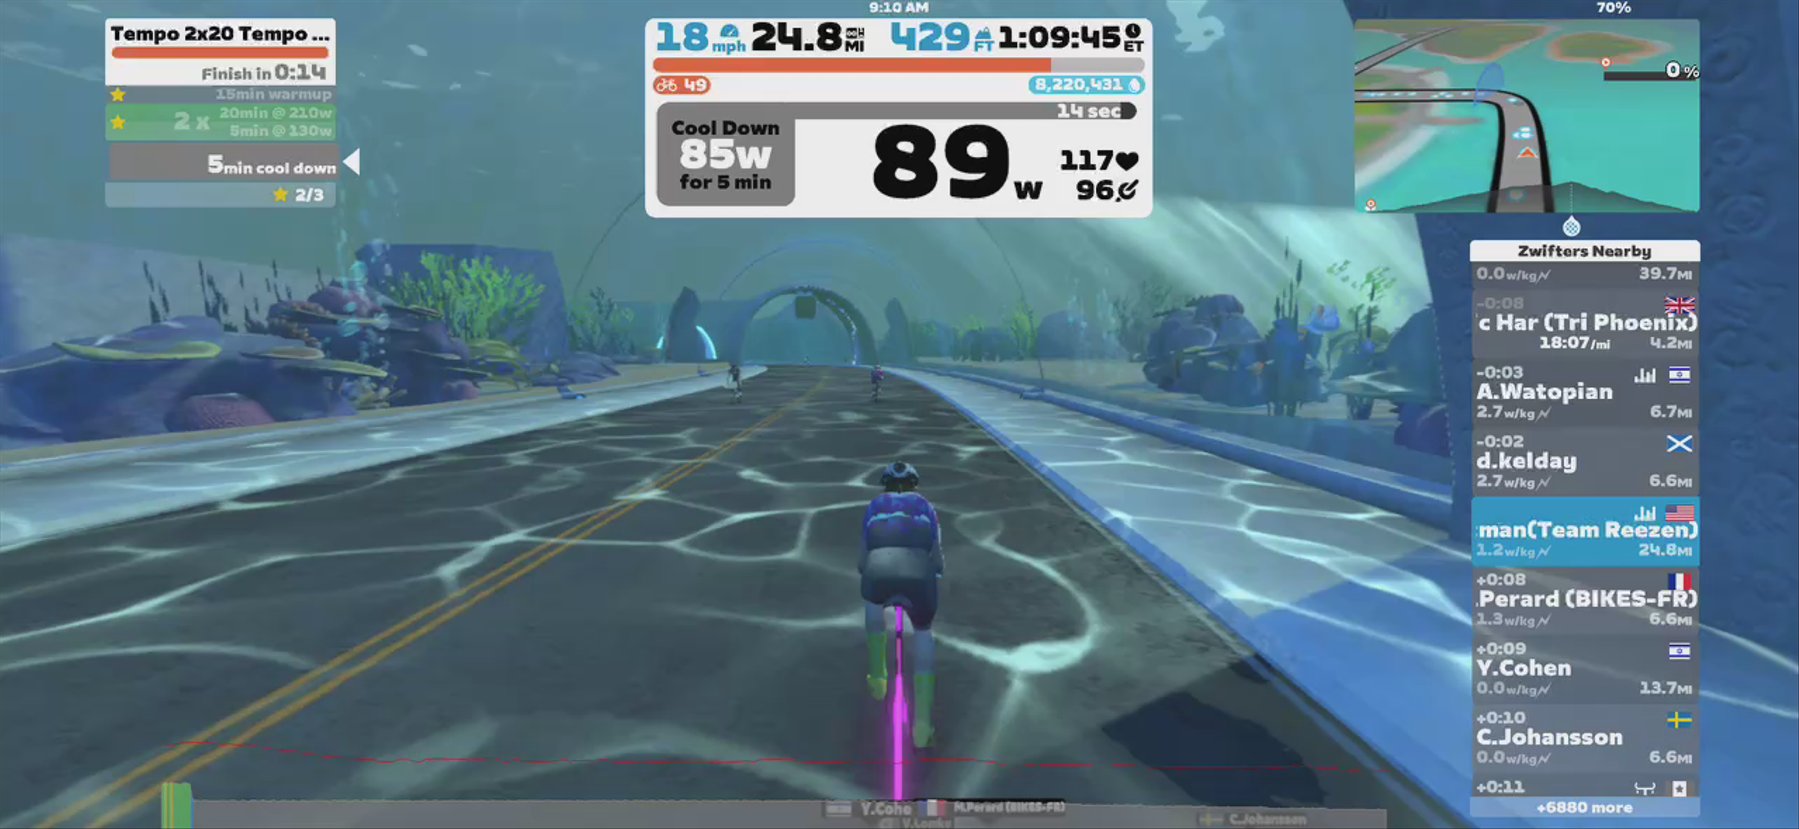 Zwift - Tempo 2x20 Tempo with force bursts, read instructions in Watopia